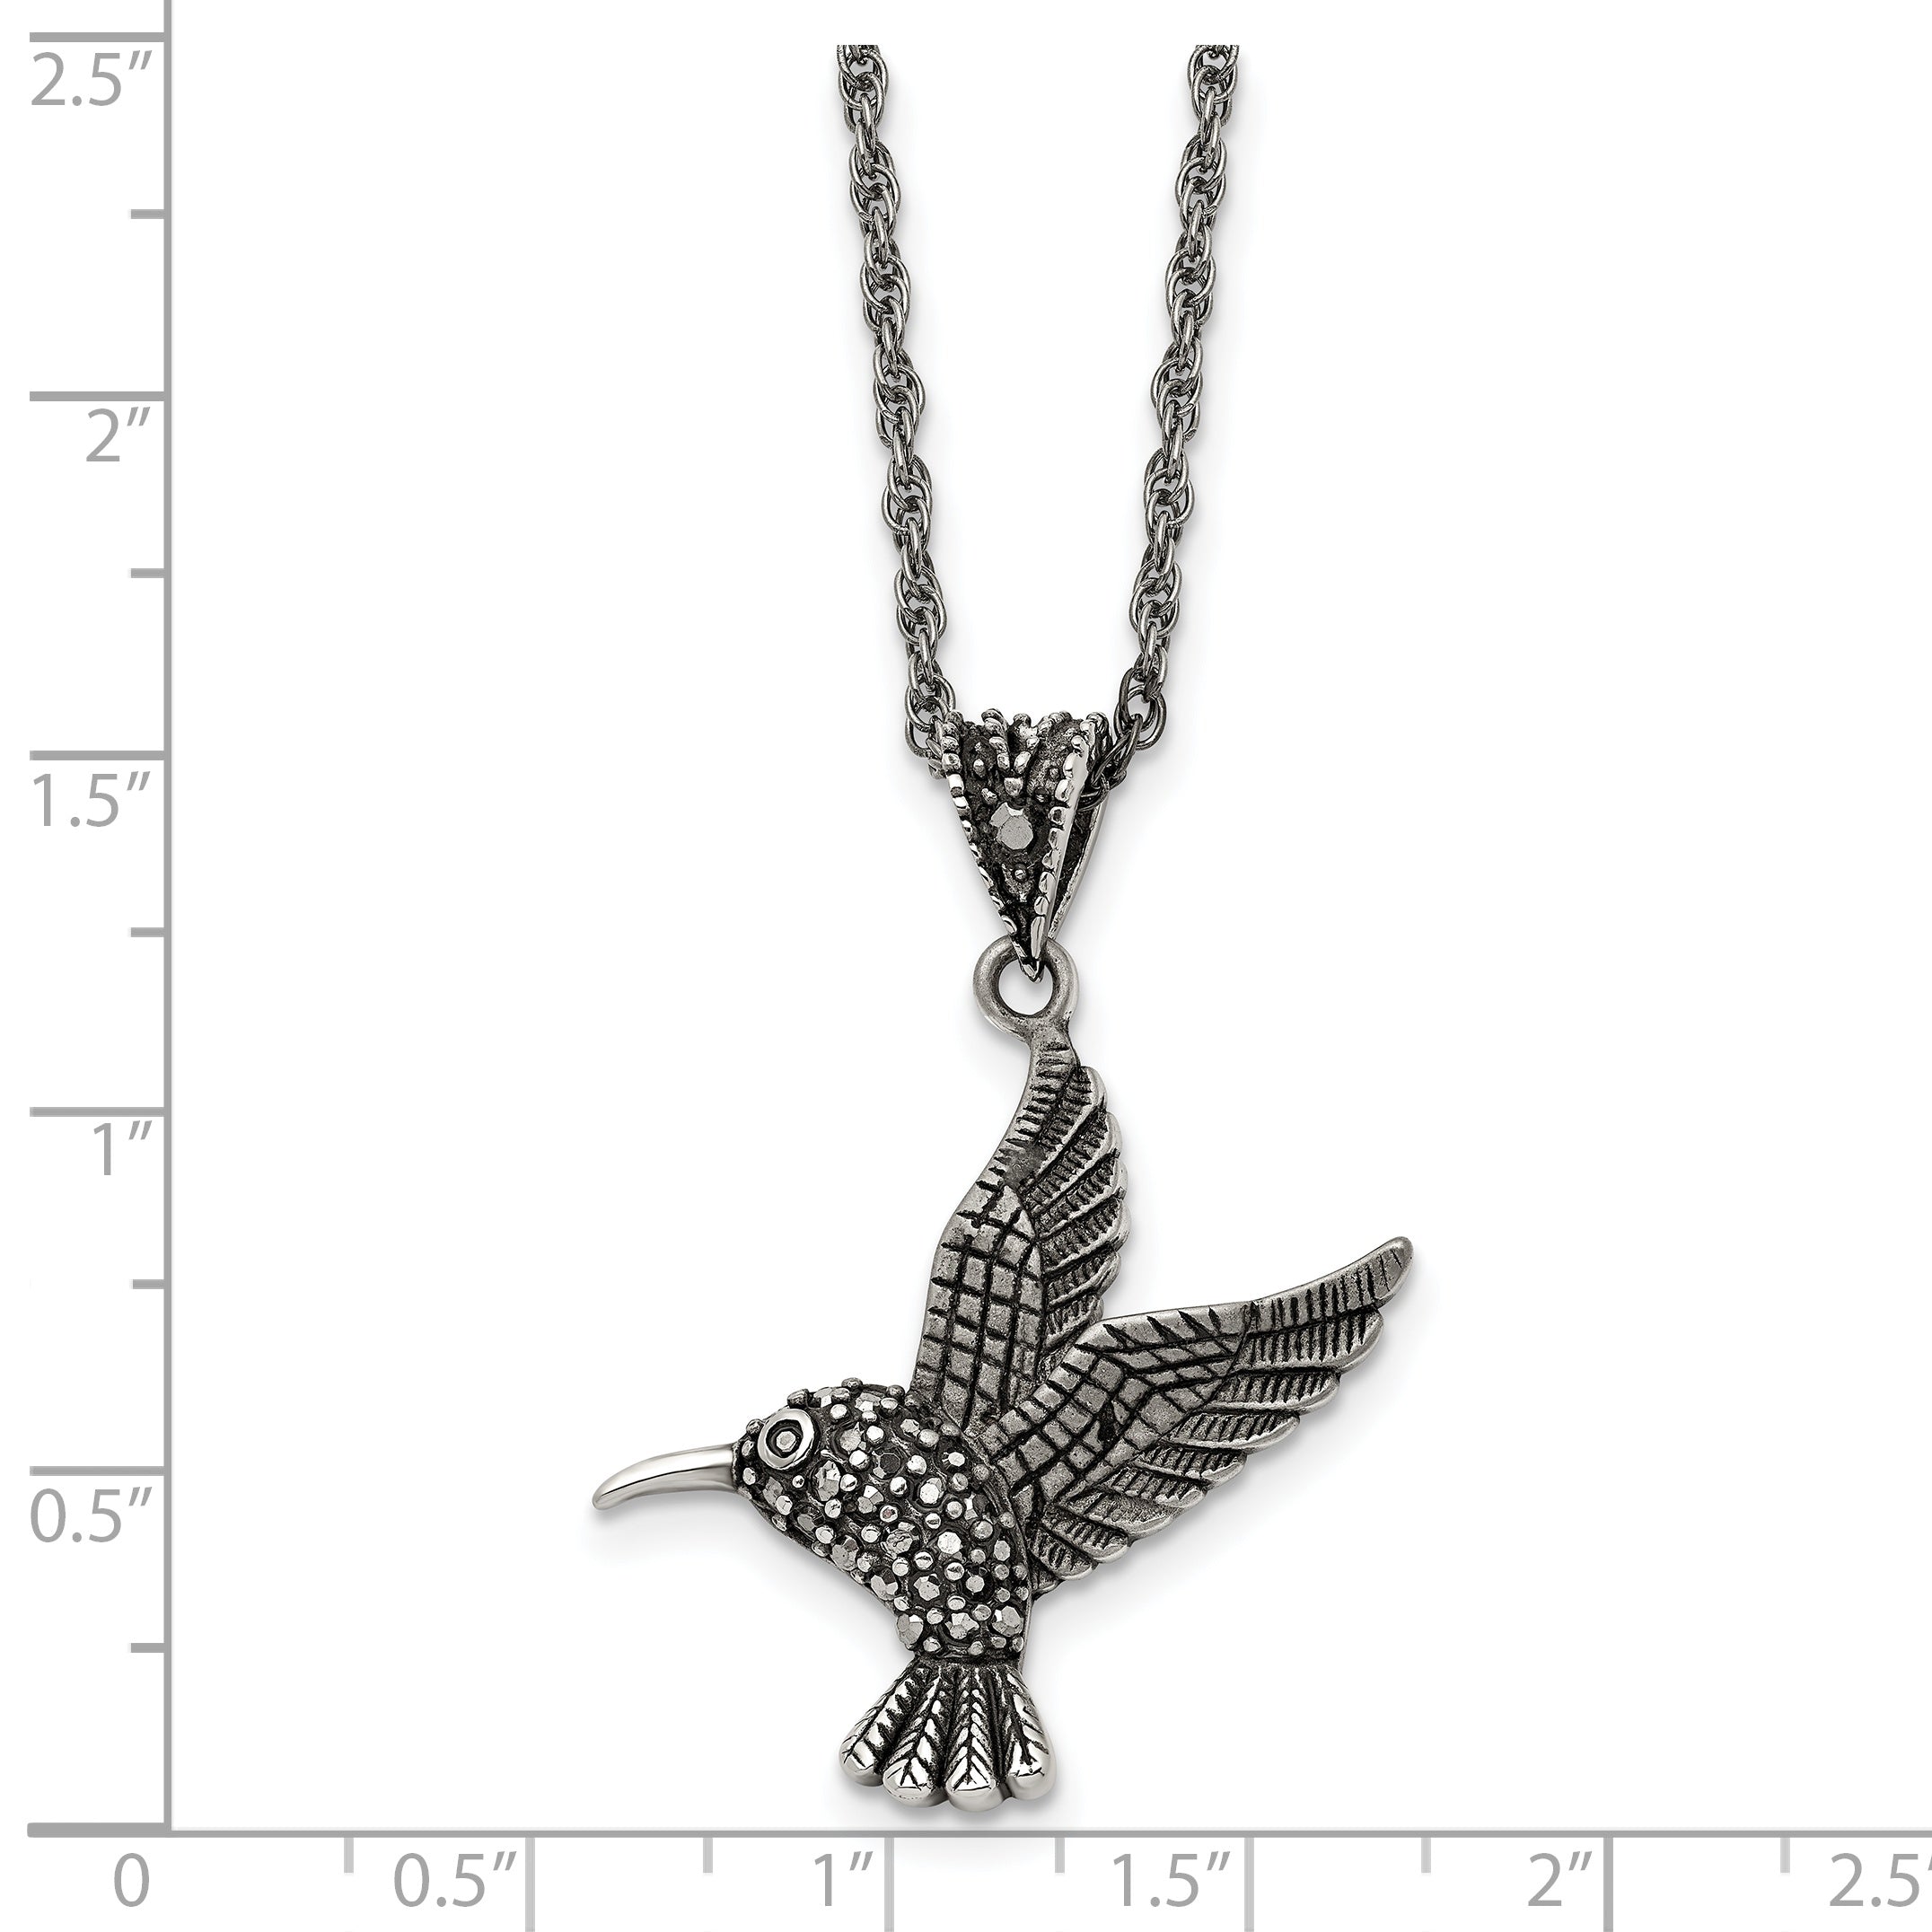 Chisel Stainless Steel Antiqued and Polished with Marcasite Hummingbird Pendant on an 18 inch Singapore Chain Necklace